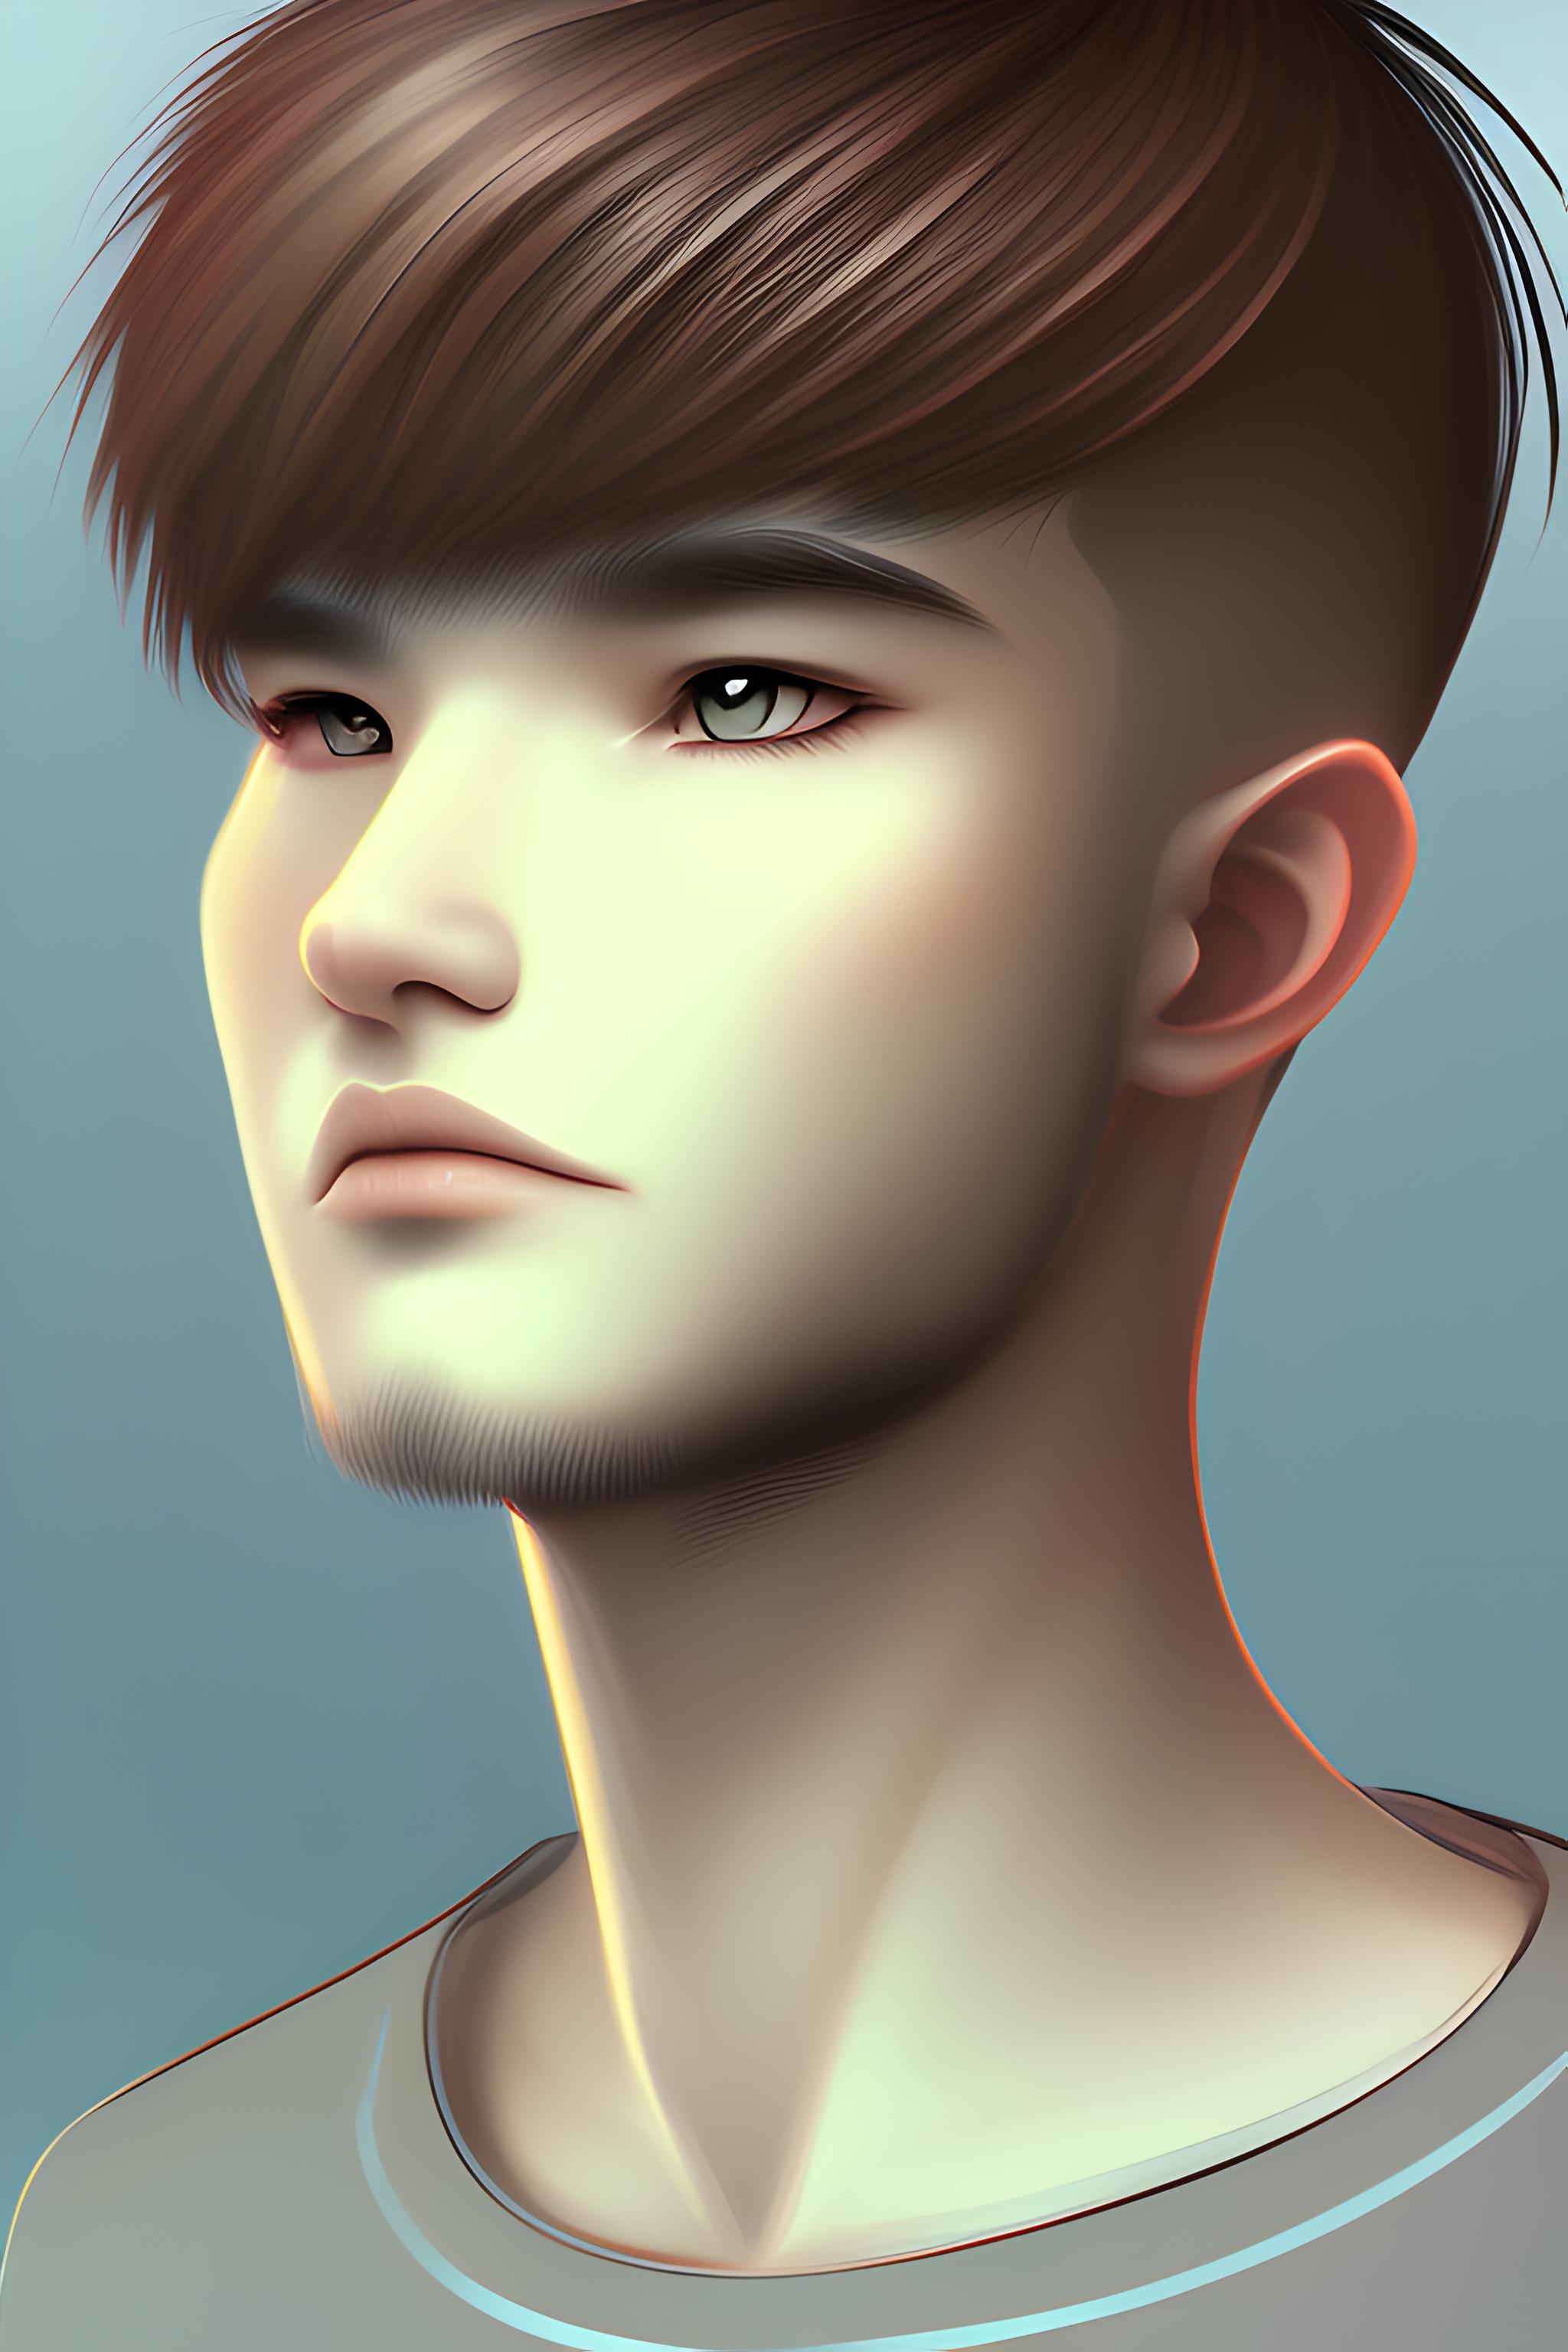 Boys Hairstyle Photo Editor - Free download and software reviews - CNET  Download